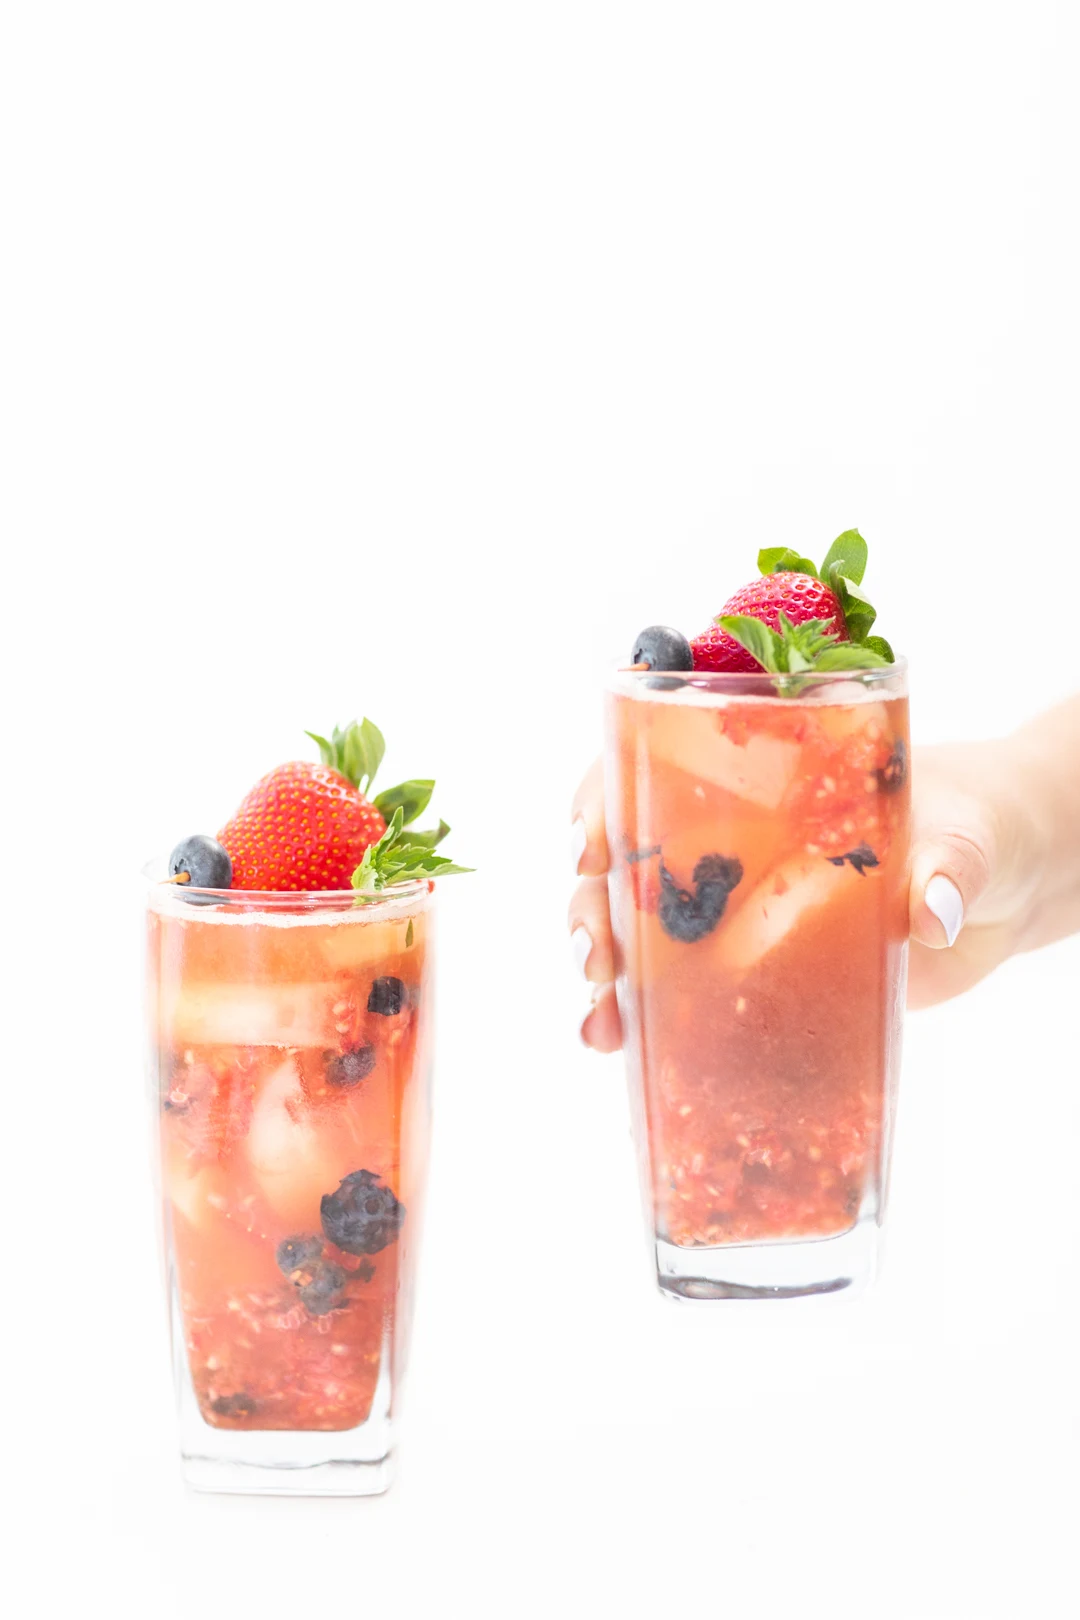 Glasses of fresh iced tea with muddled berries